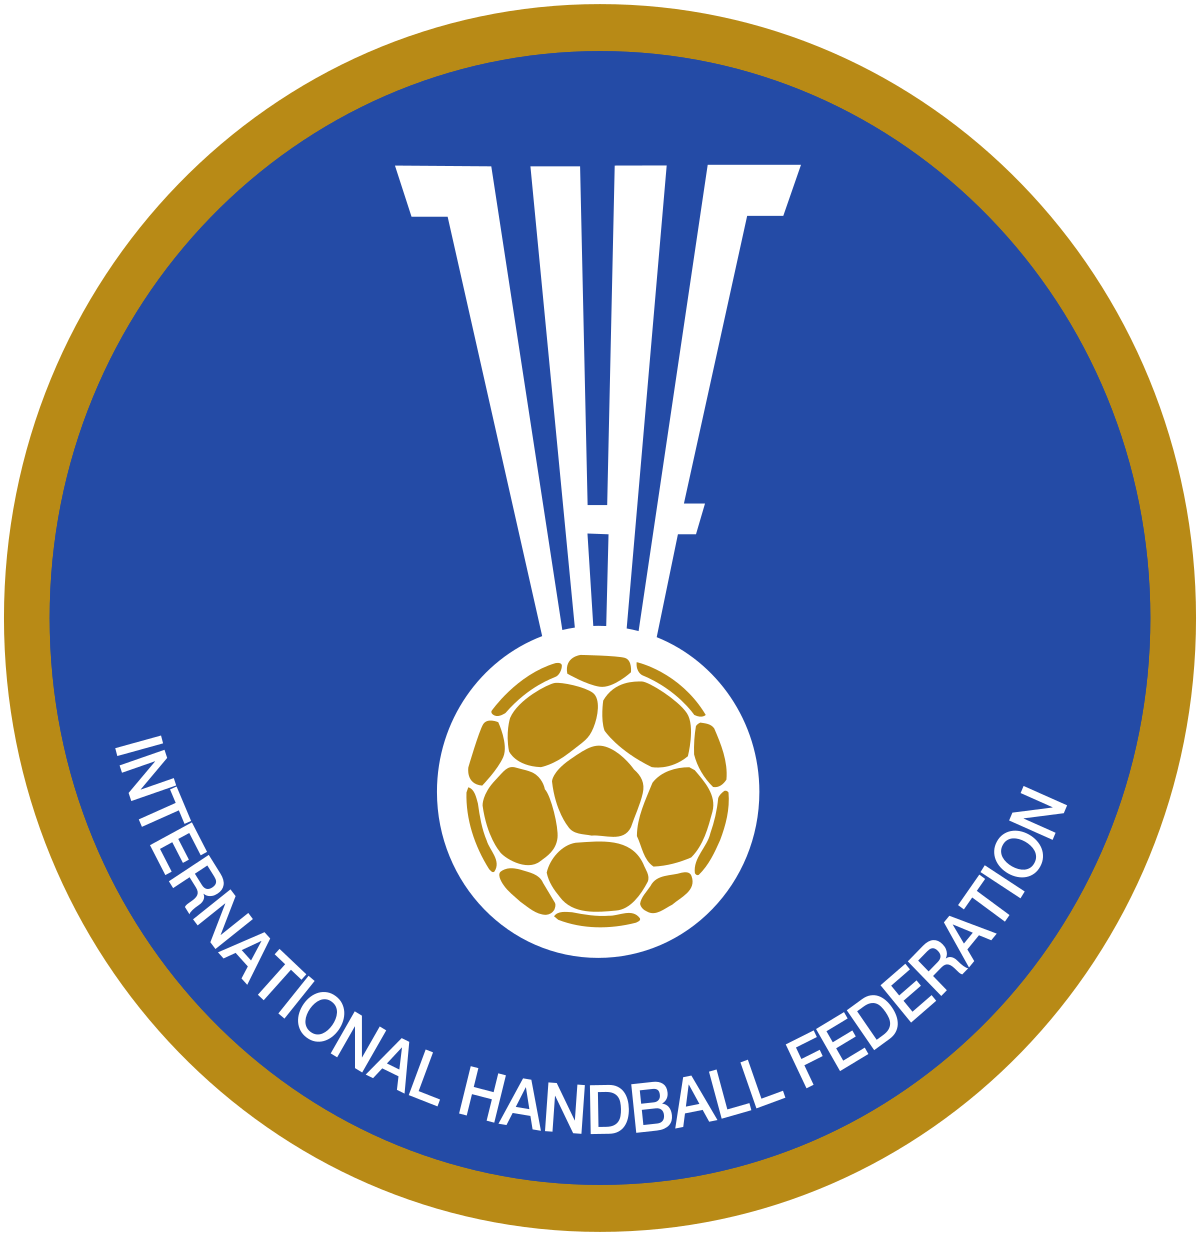 Handball qualification system announced for Tokyo 2020